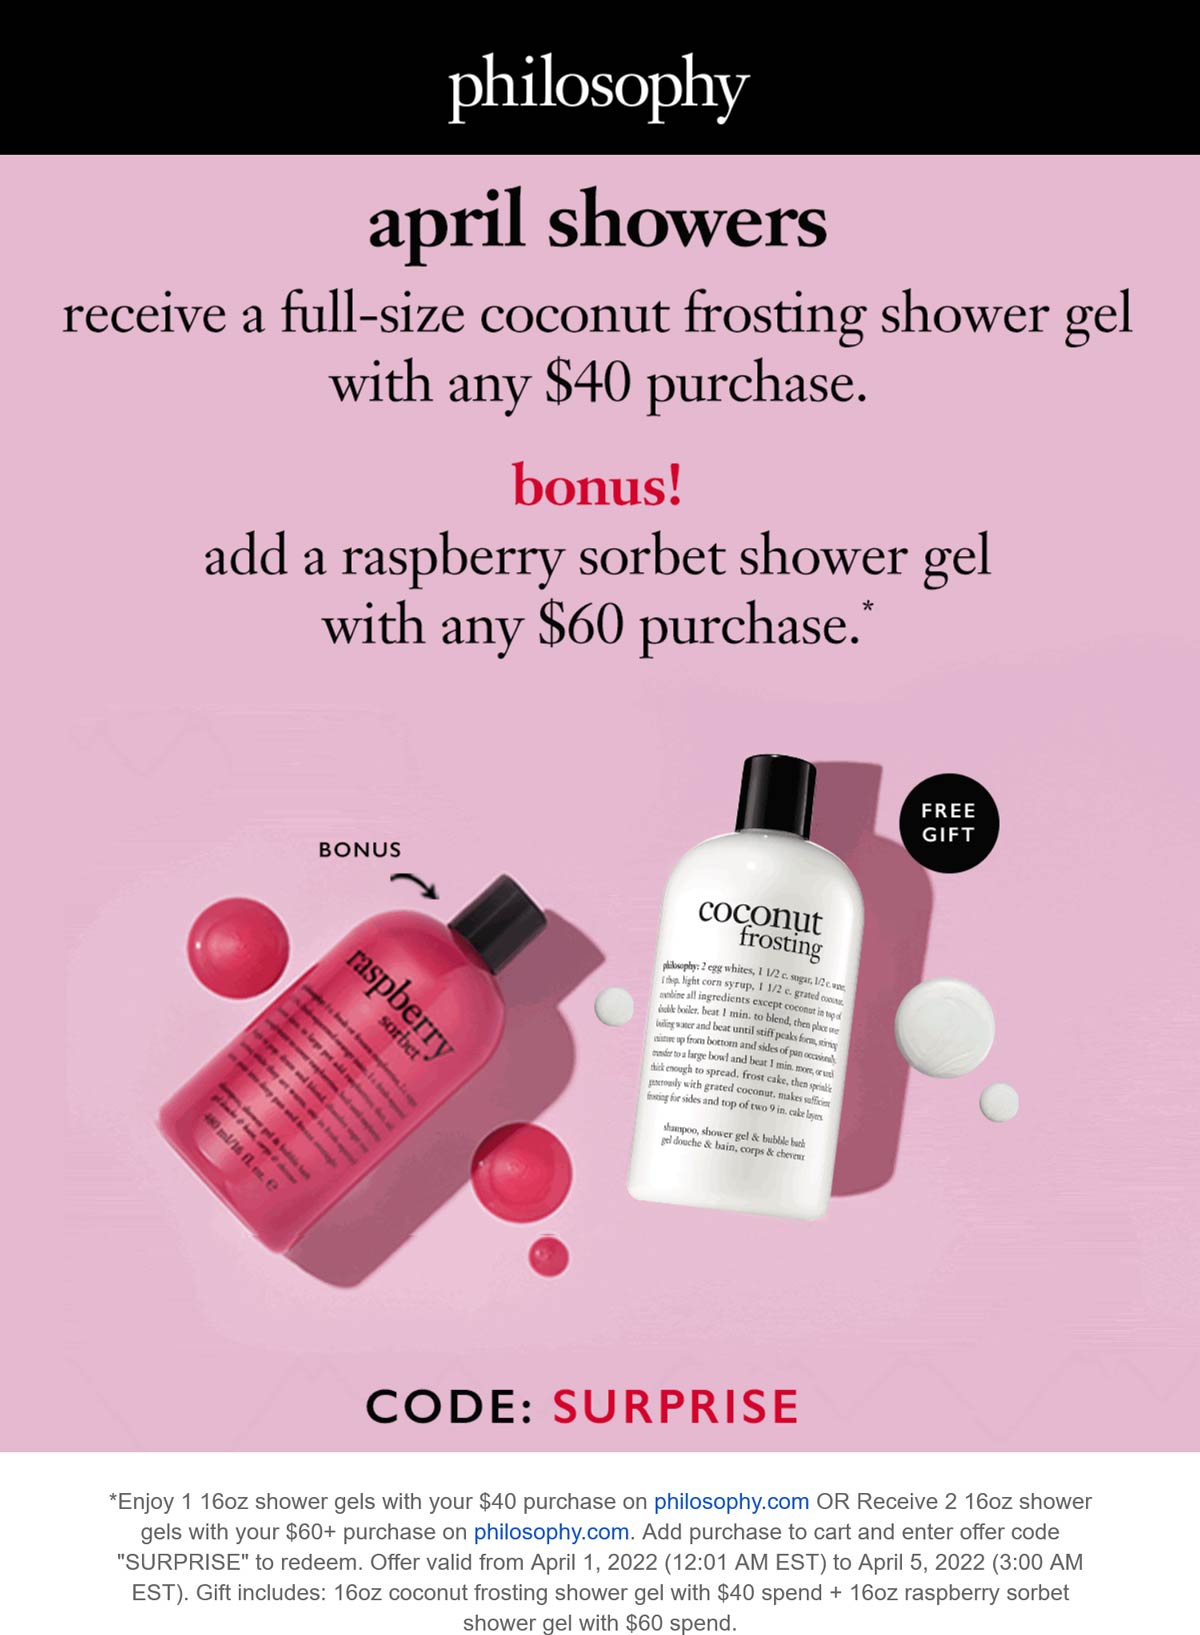 Philosophy stores Coupon  Free full-size shower gel on $40 + another on $60 at Philosophy via promo code SURPRISE #philosophy 